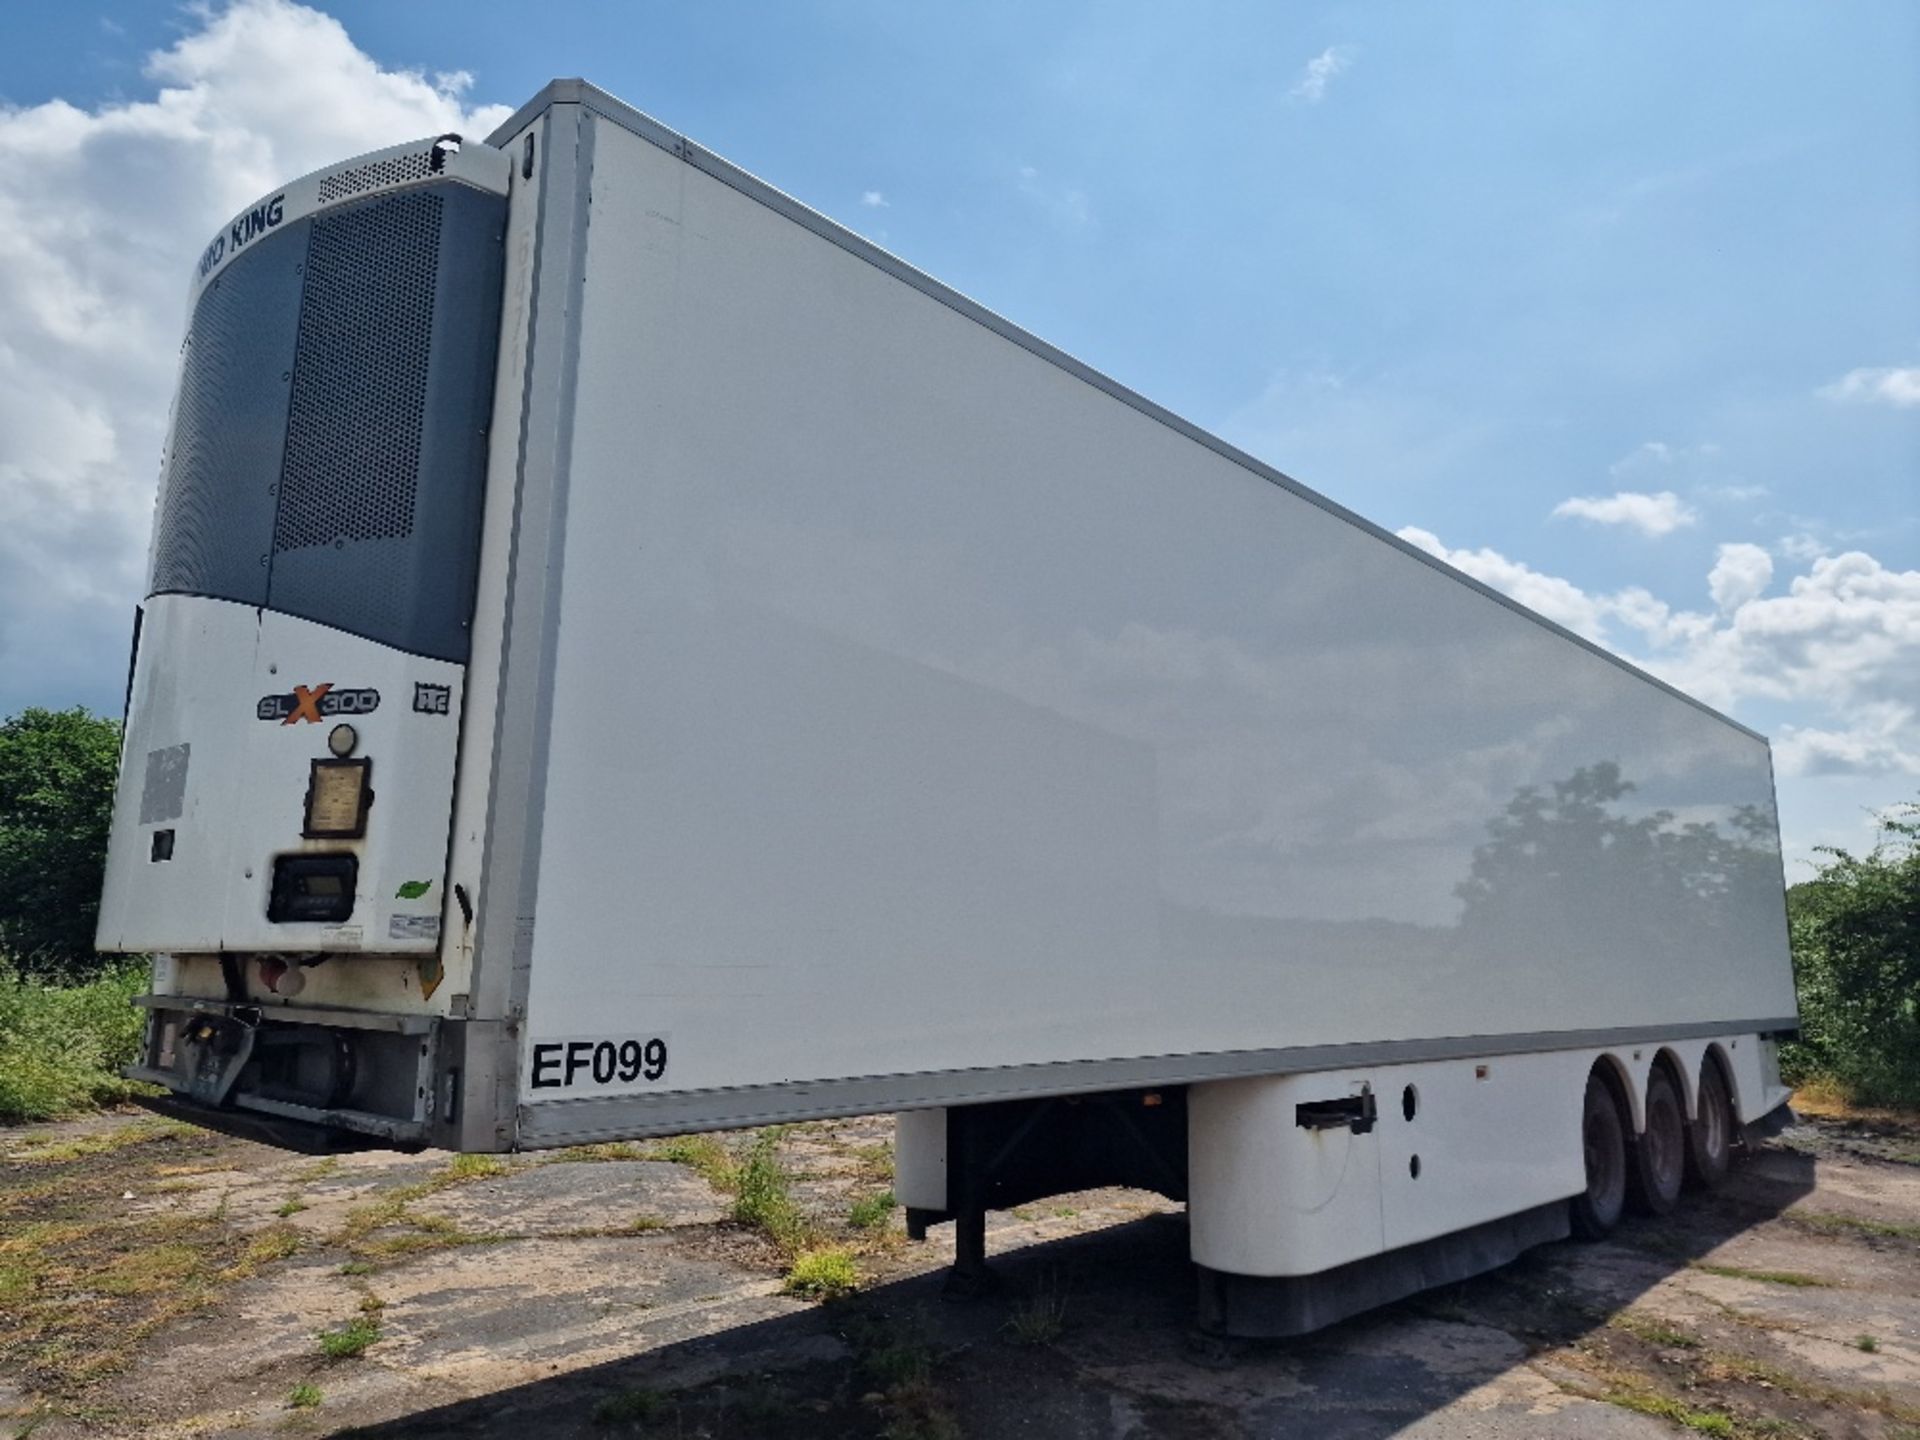 EF099 - 2009 Montracon 13.6m Tri-Axle Refrigerated Trailer - Image 21 of 21